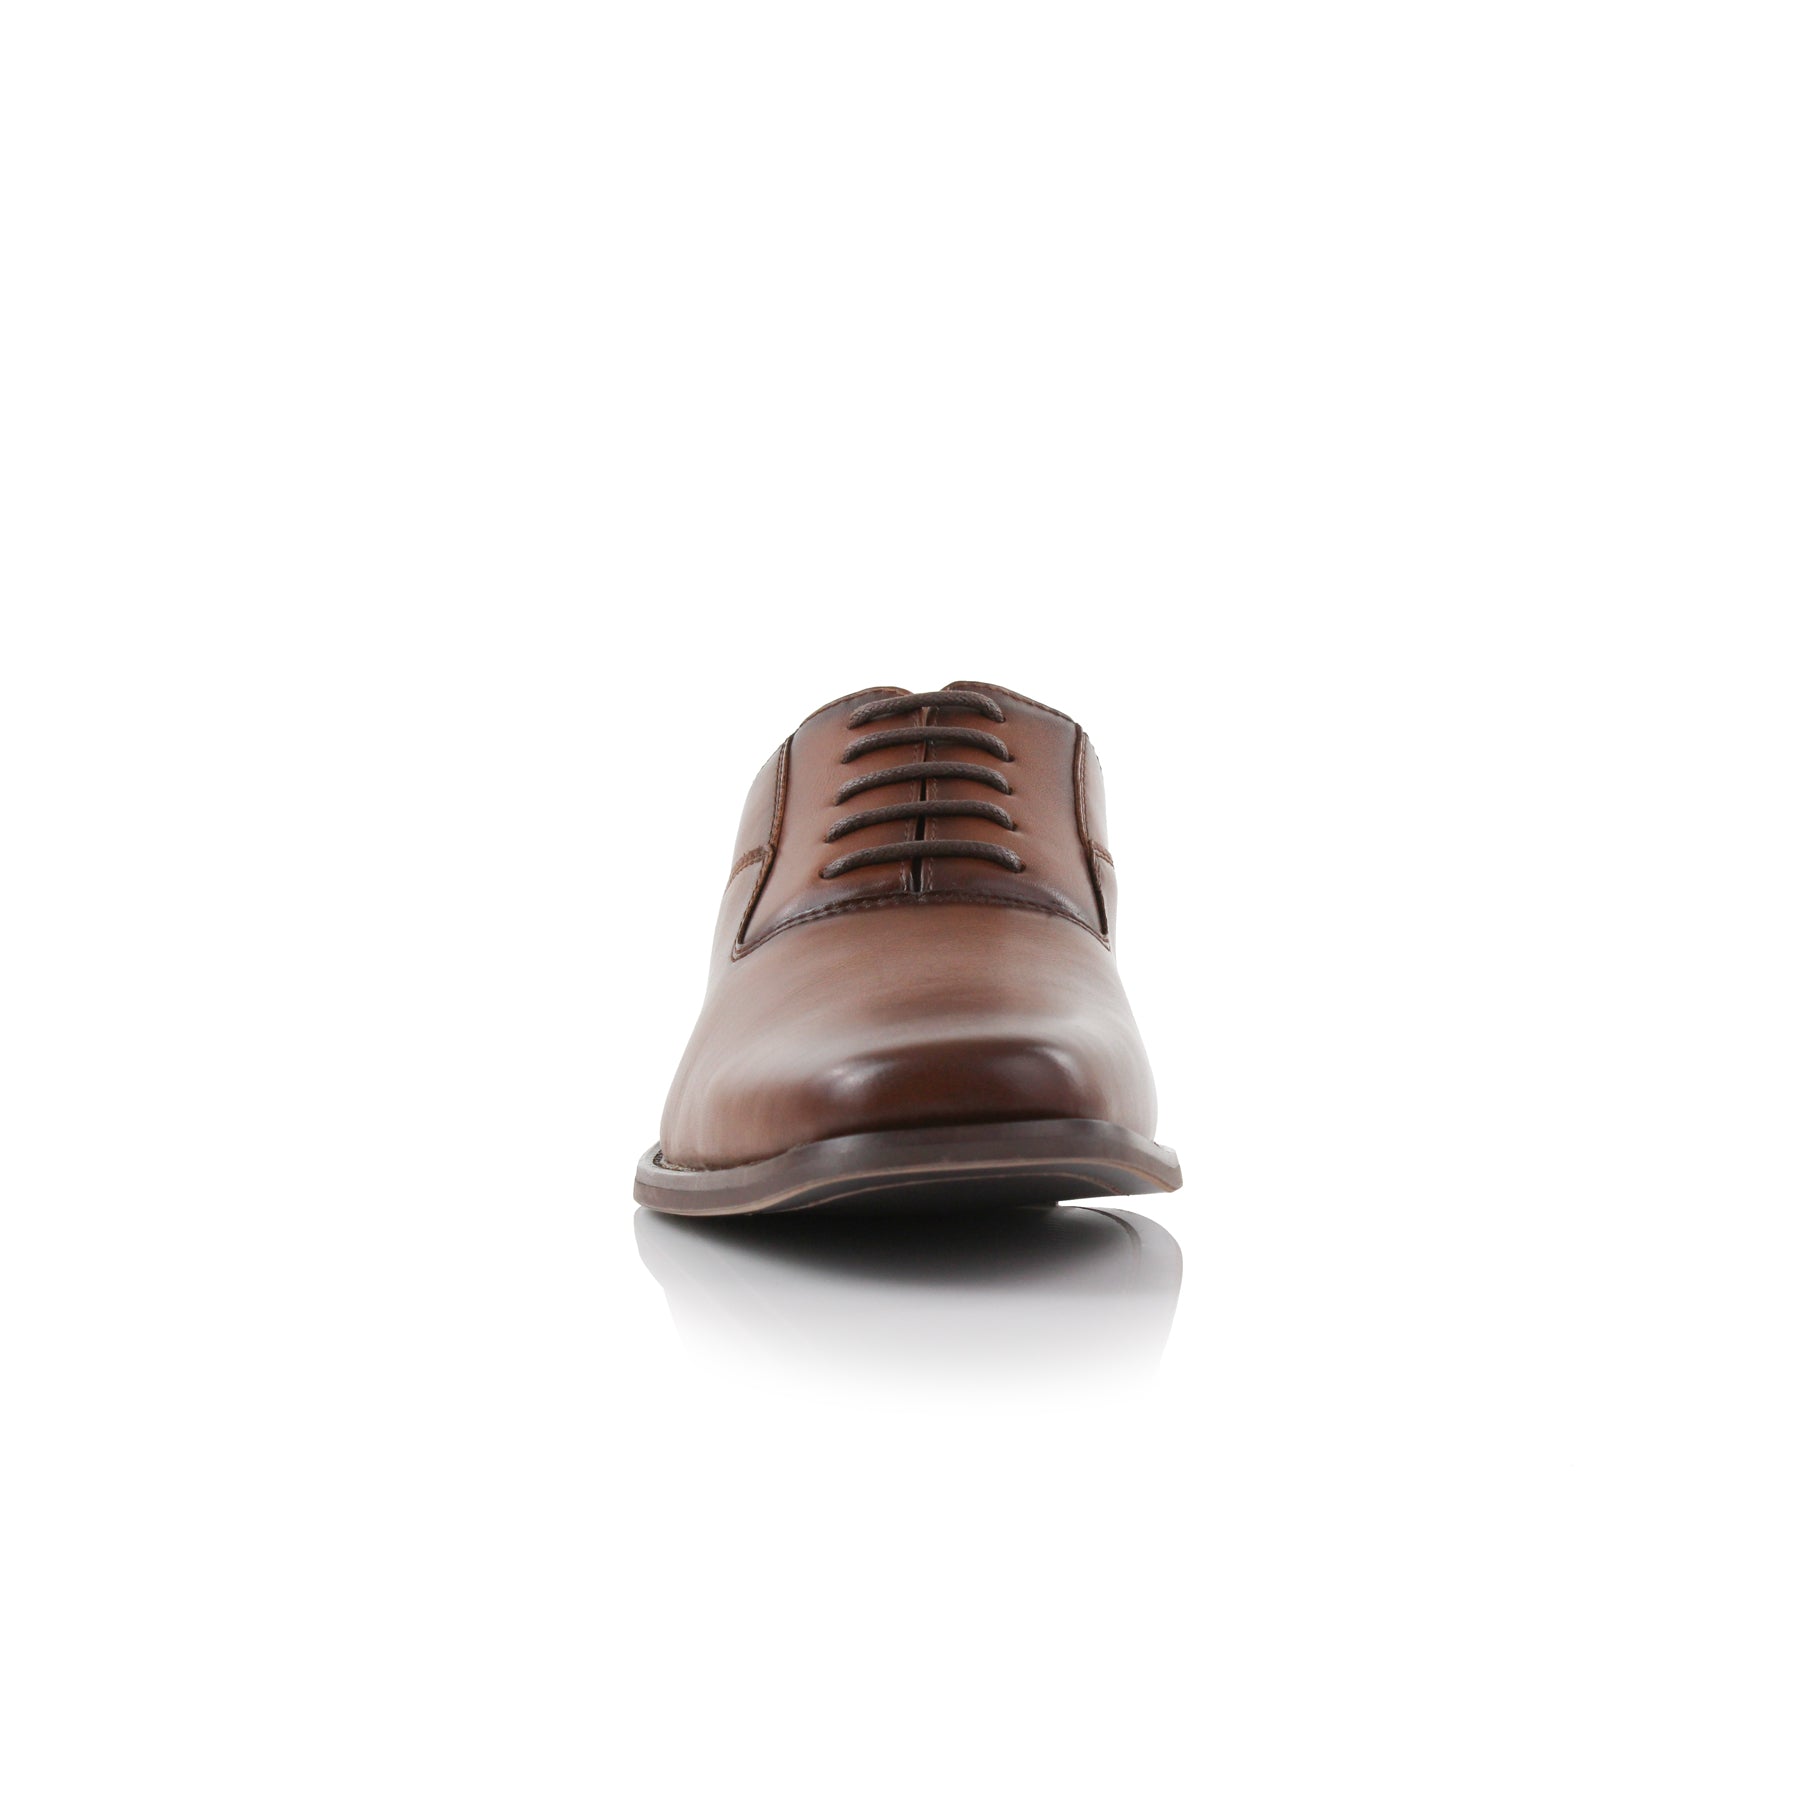 Classic Tuxedo Oxfords | Jeremiah by Ferro Aldo | Conal Footwear | Front Angle View